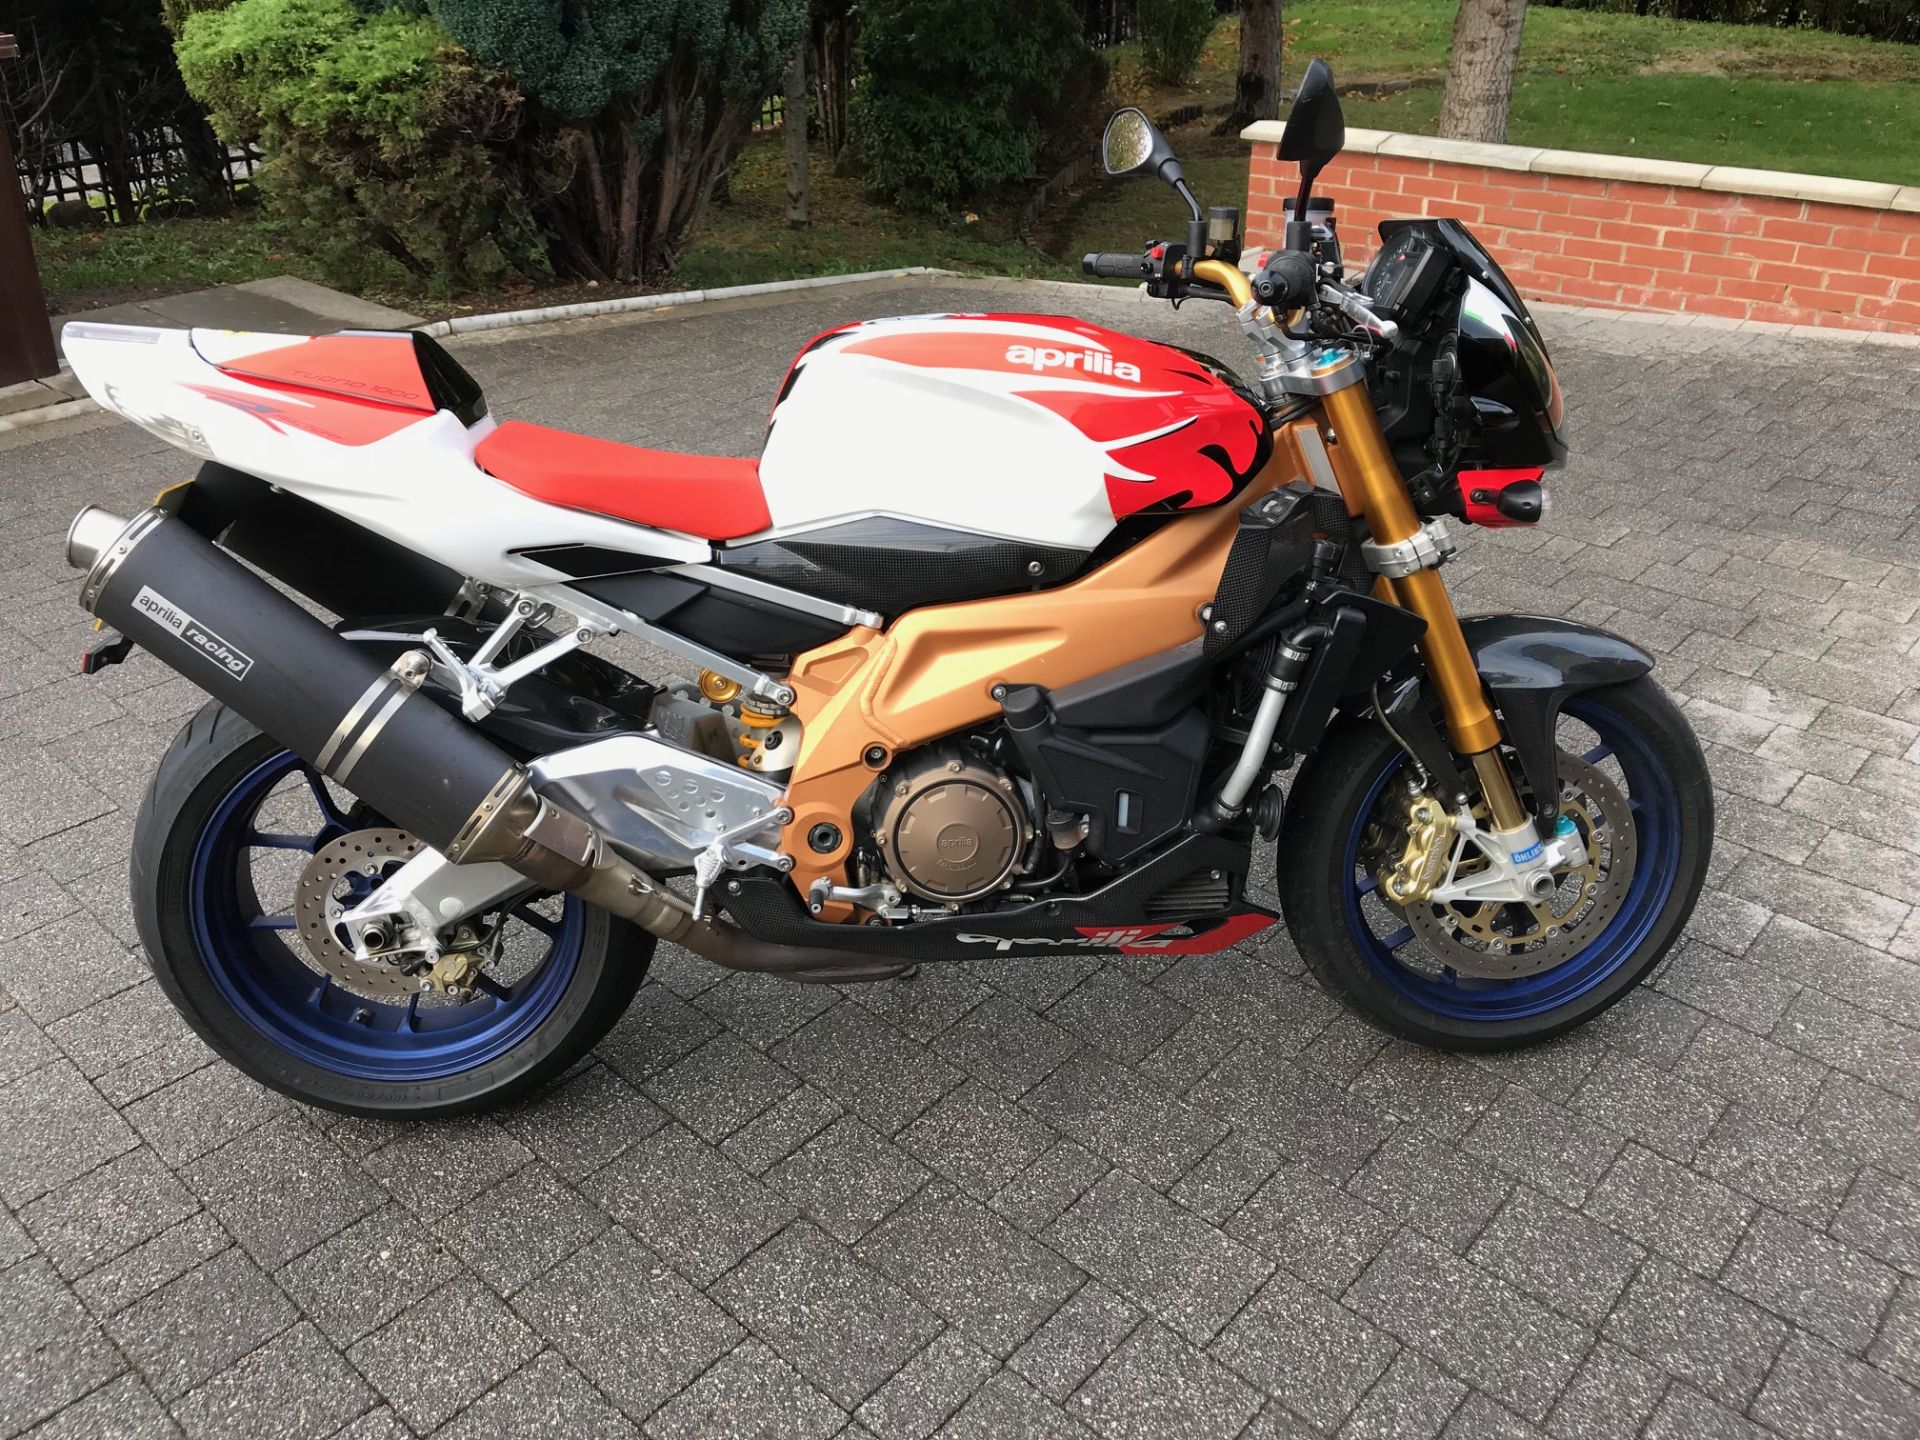 Aprilia Factory RSV Tuono 1000 Motorcycle, red / white, 2007 model which has covered 3,902 miles,